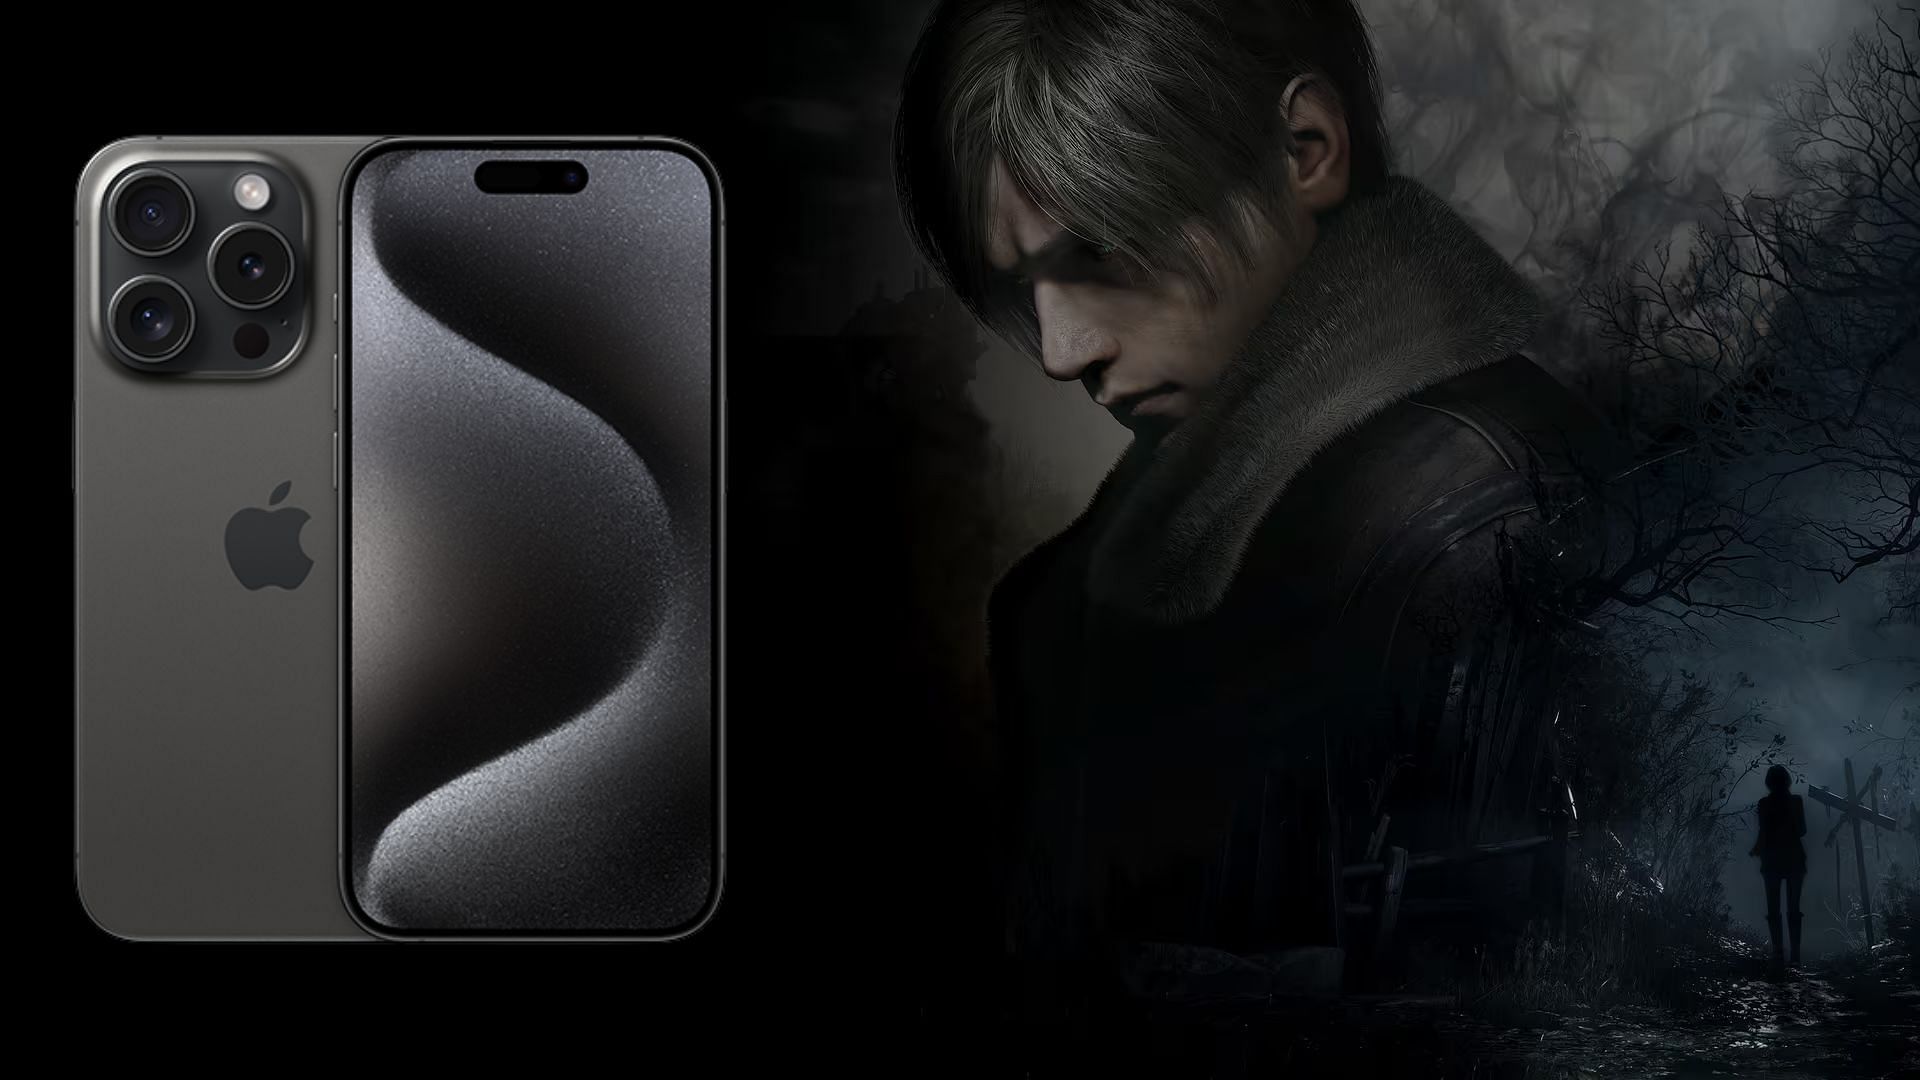 Pricing of the Resident Evil 4 Remake on iPhone 15 Pro has been revealed